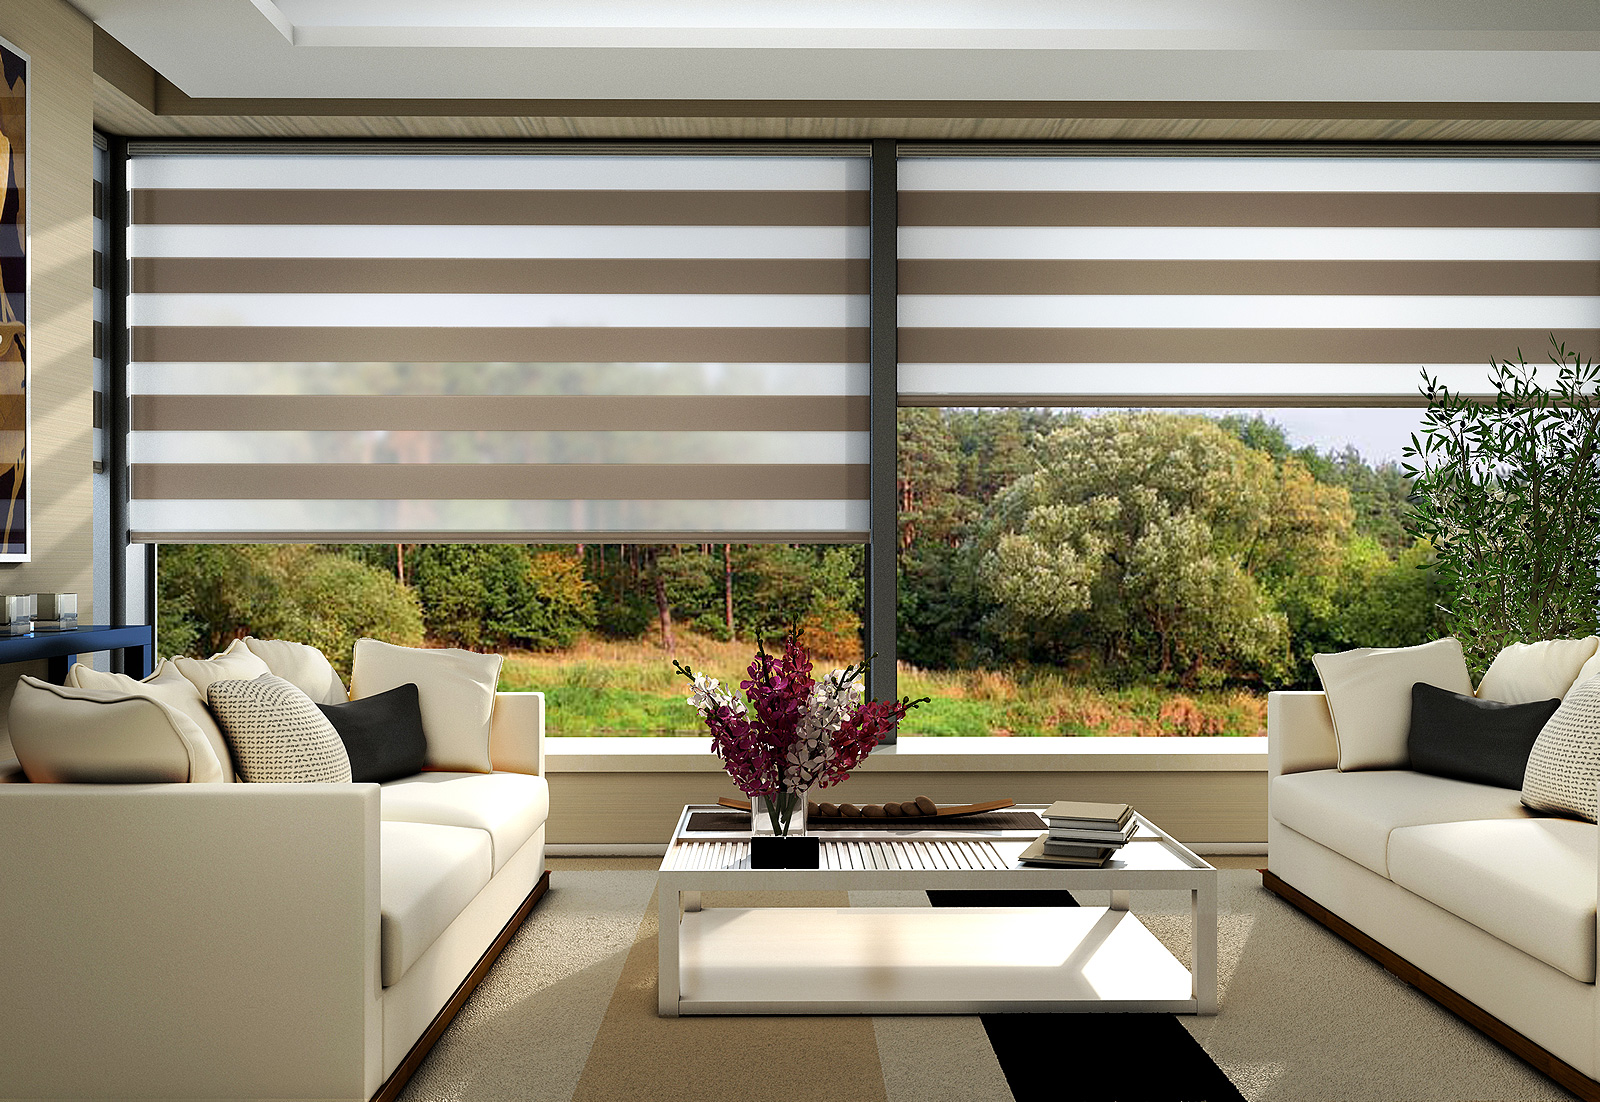 Fully Motorized Roller Blinds for your home!